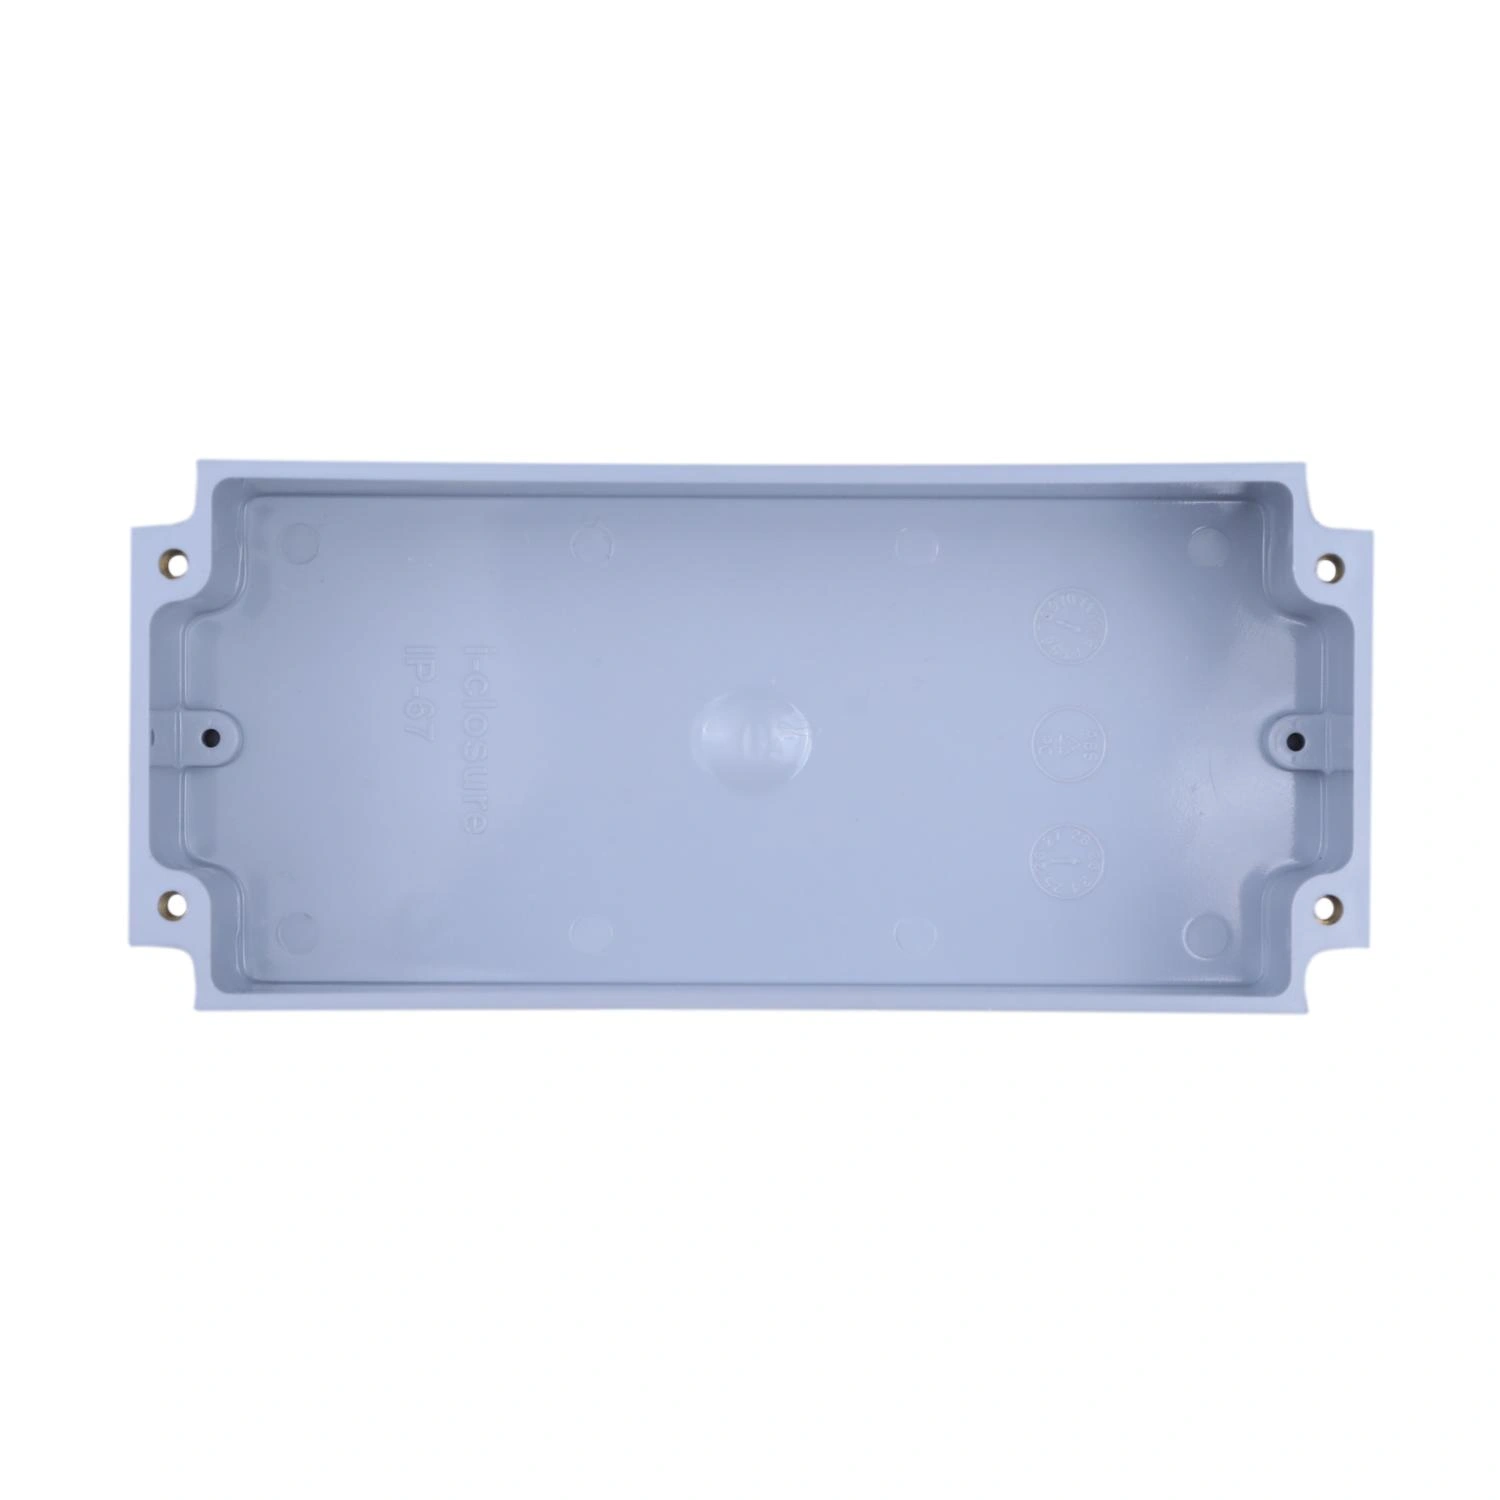 ABS Enclosure 180 X 80 X 100 mm Clear IP67-1